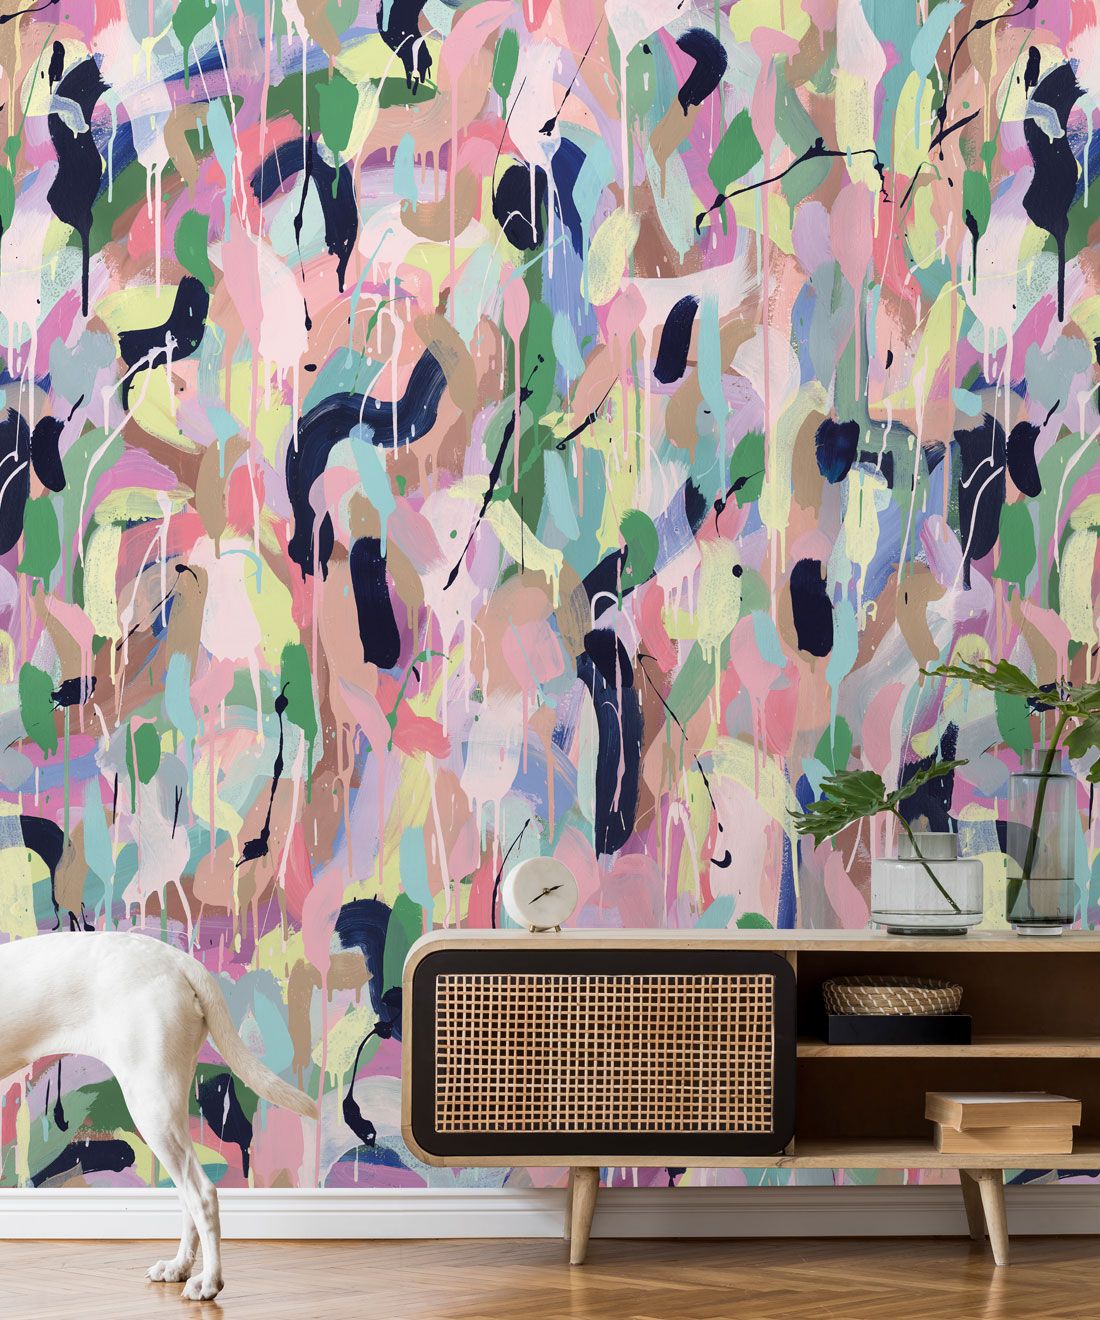 Between Tides Wallpaper • Colorful Painterly Wallpaper • Tiff Manuell • Abstract Expressionist Wallpaper • Insitu